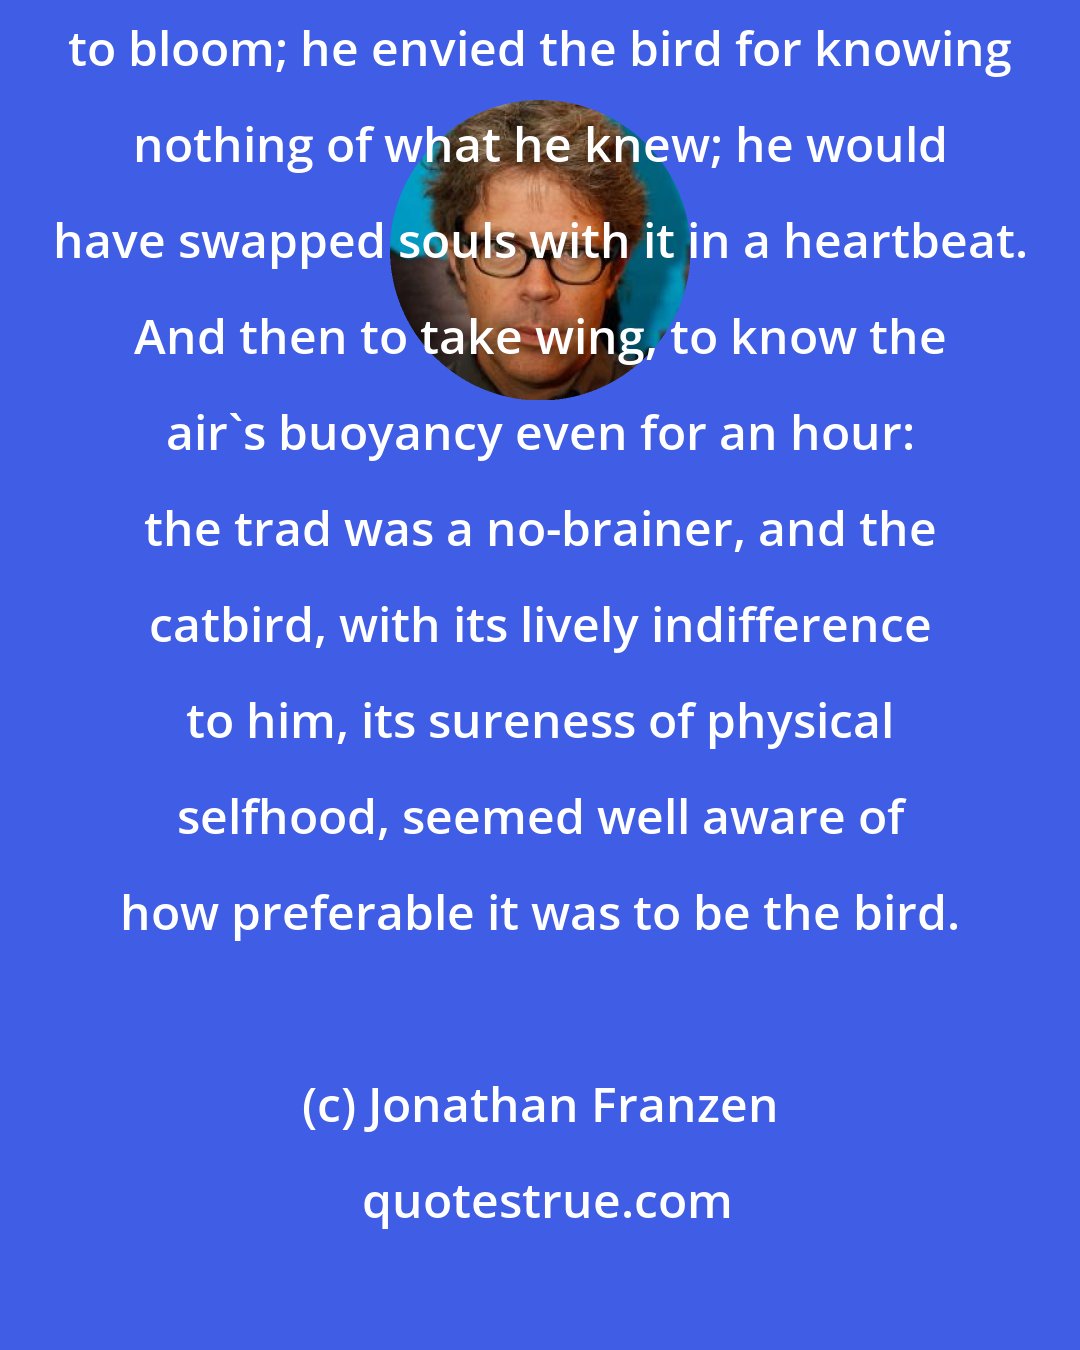 Jonathan Franzen: He watched a catbird hopping around in an azalea that was readying itself to bloom; he envied the bird for knowing nothing of what he knew; he would have swapped souls with it in a heartbeat. And then to take wing, to know the air's buoyancy even for an hour: the trad was a no-brainer, and the catbird, with its lively indifference to him, its sureness of physical selfhood, seemed well aware of how preferable it was to be the bird.